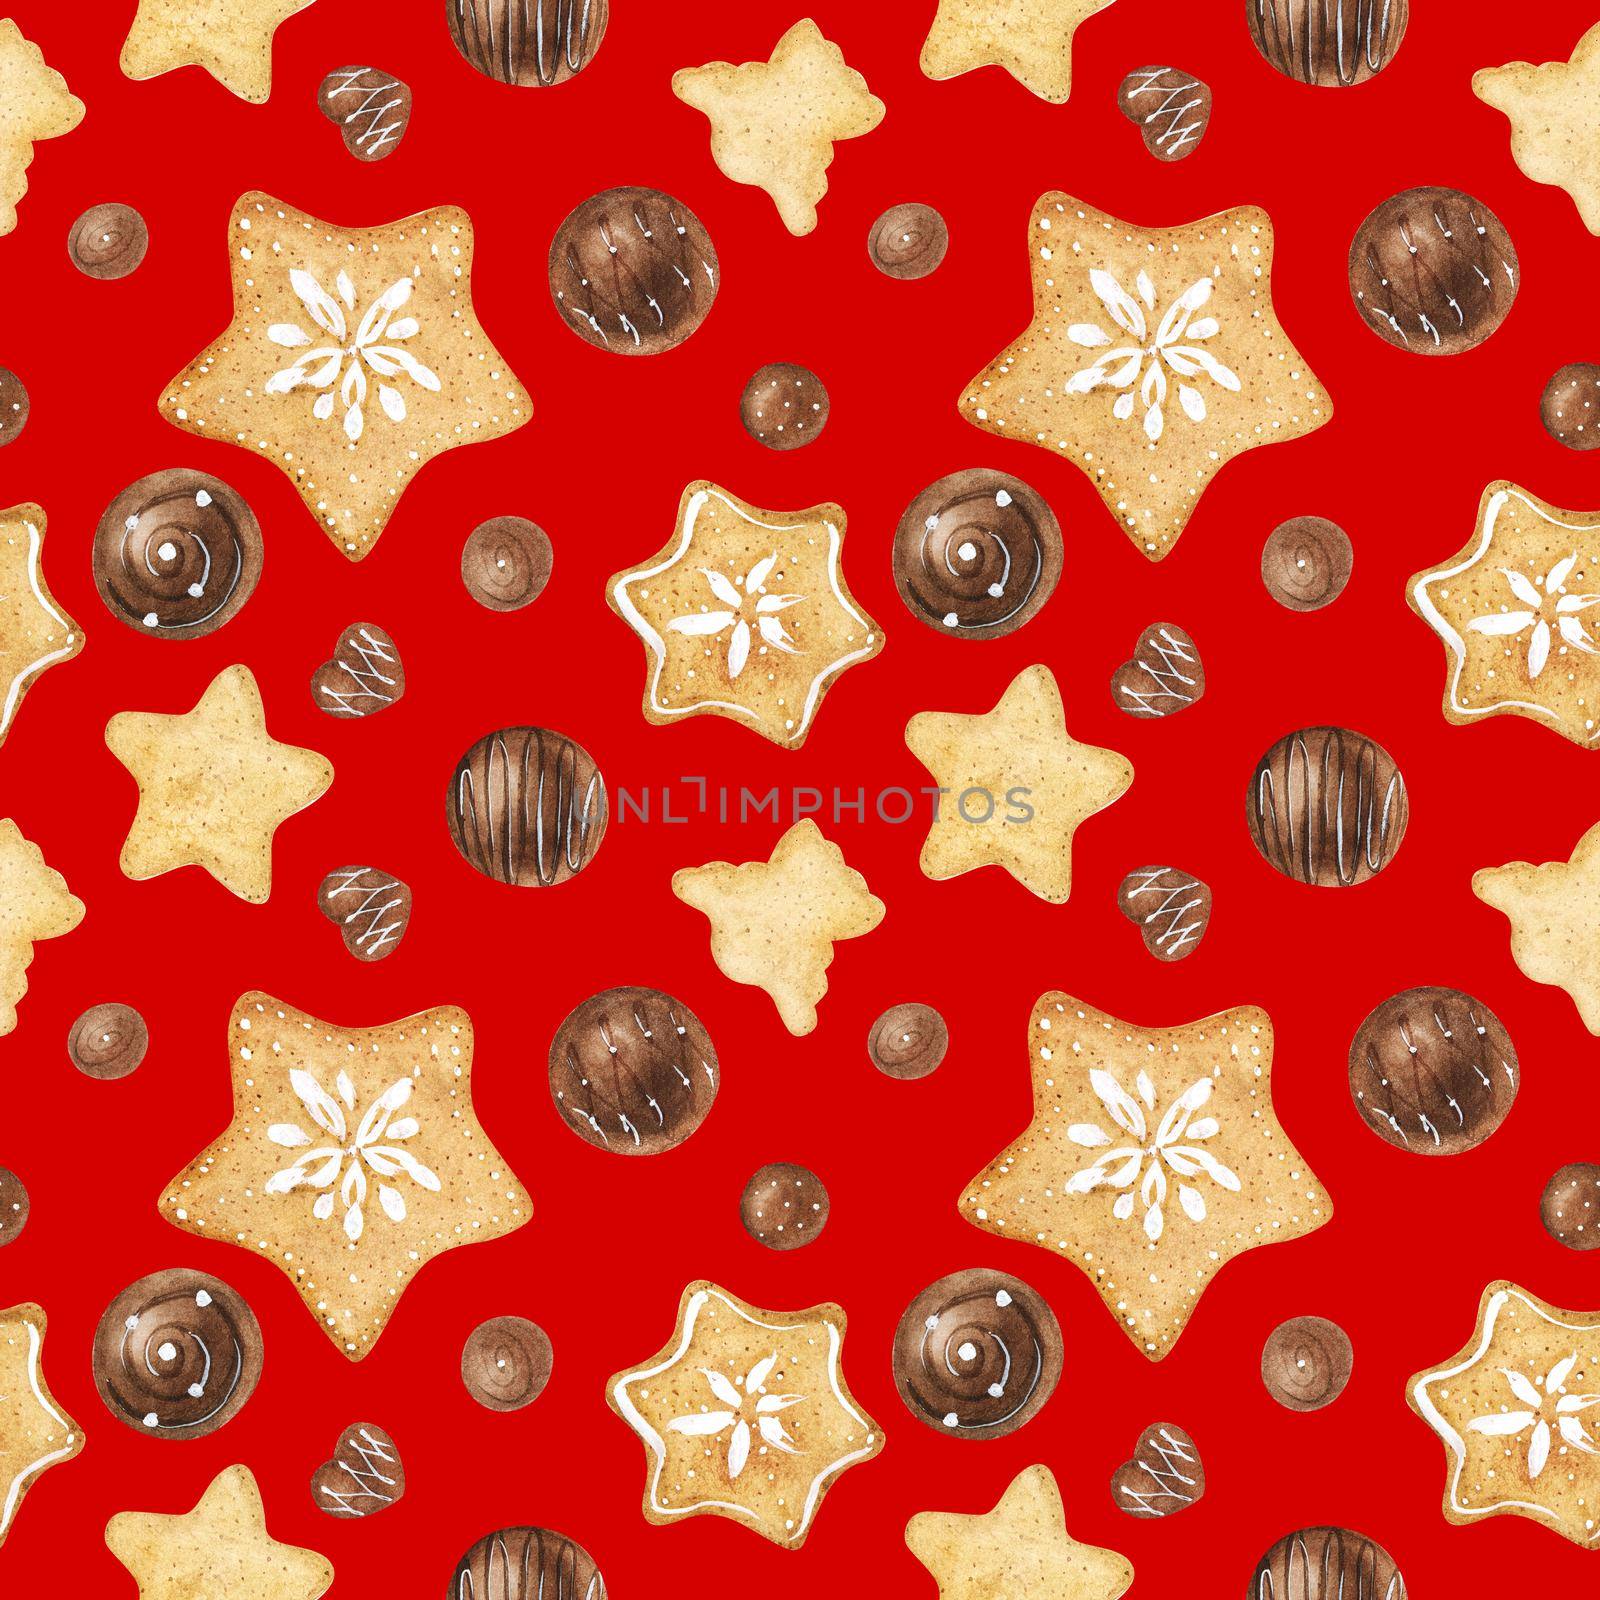 Sweet winter seamless pattern with chocolate candies and cookies. Watercolor illustration for any event decoration, red background, path included